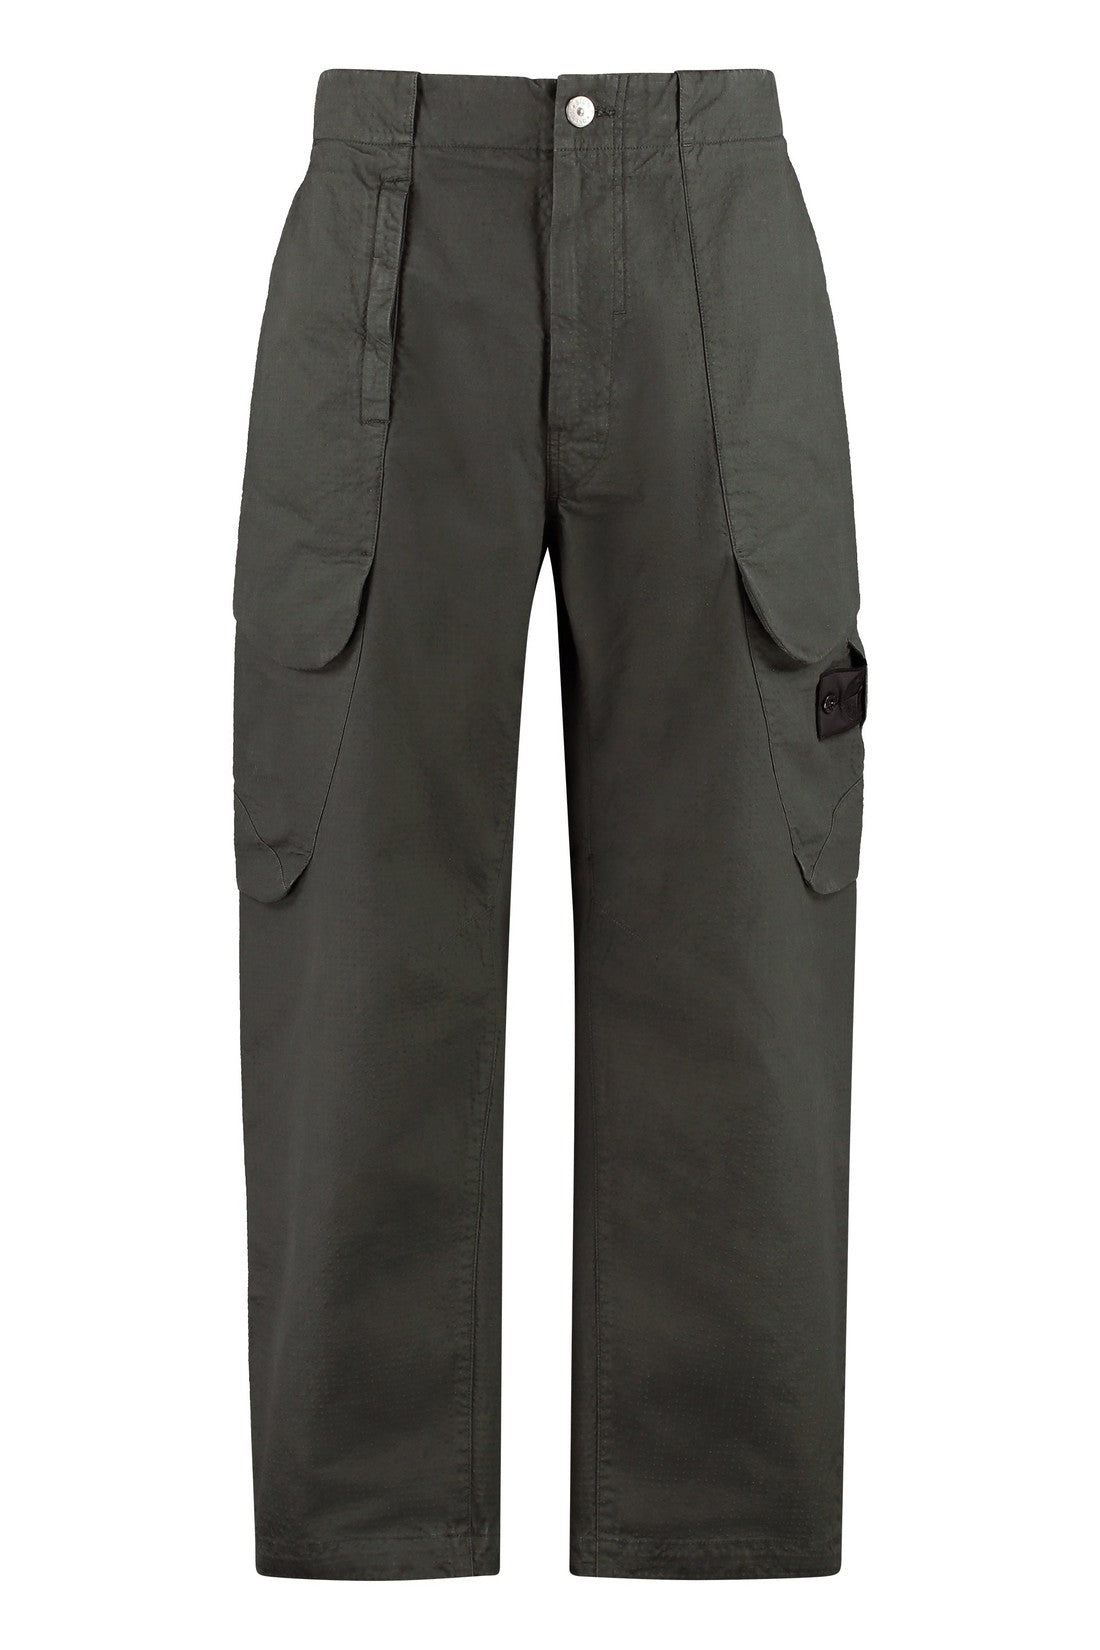 Stone Island Shadow Project-OUTLET-SALE-Multi-pocket cotton trousers-ARCHIVIST